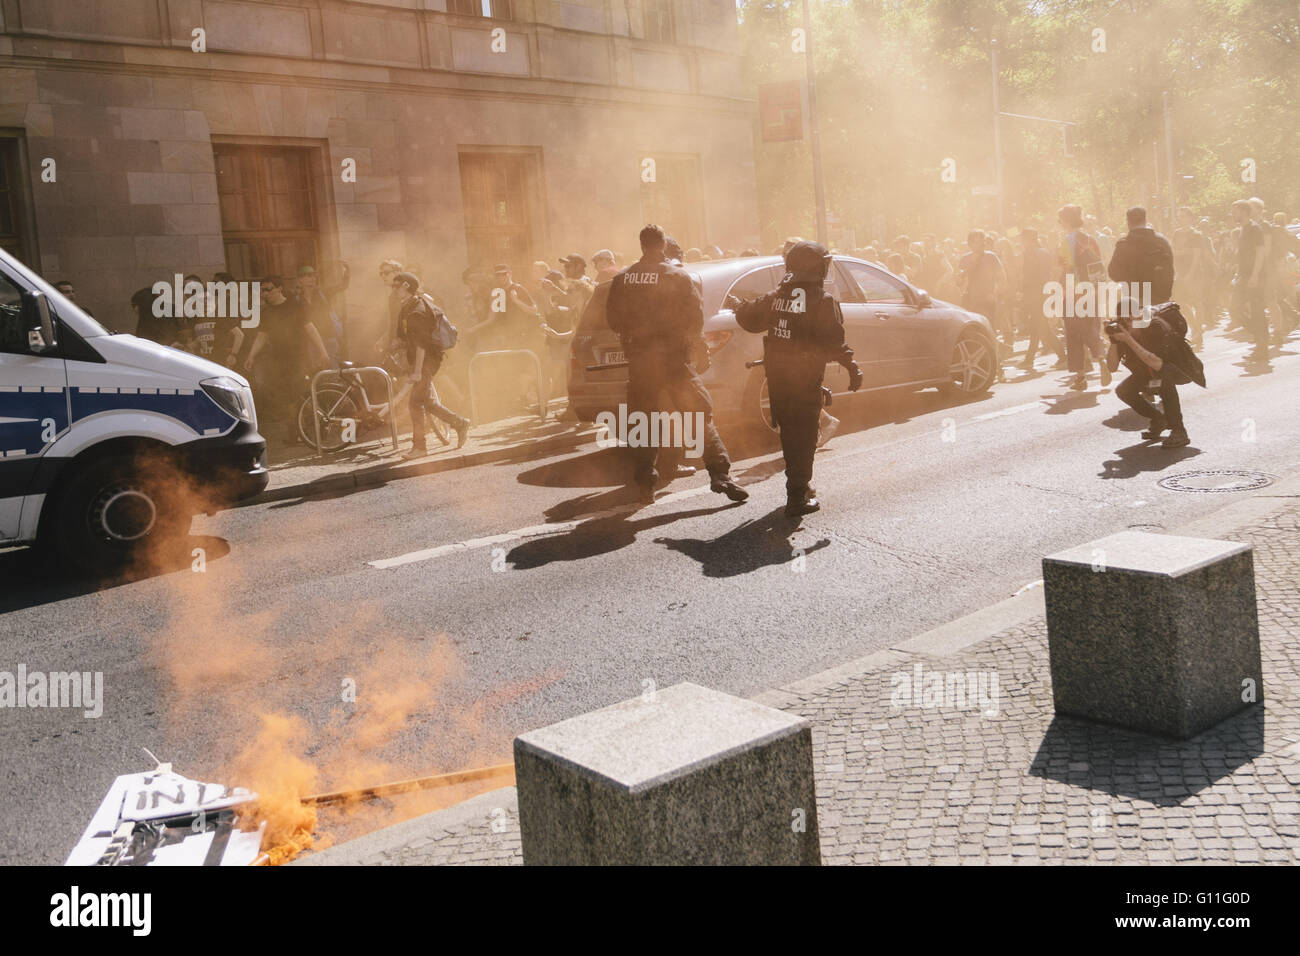 Berlin, Berlin, Germany. 7th May, 2016. Police secures a road after protesters break through a police barrier during the counter protests against the rally held under the motto 'Merkel muss weg![Merkel must go]' organised by far-right group 'We for Berlin & We for Germany' Credit:  Jan Scheunert/ZUMA Wire/Alamy Live News Stock Photo